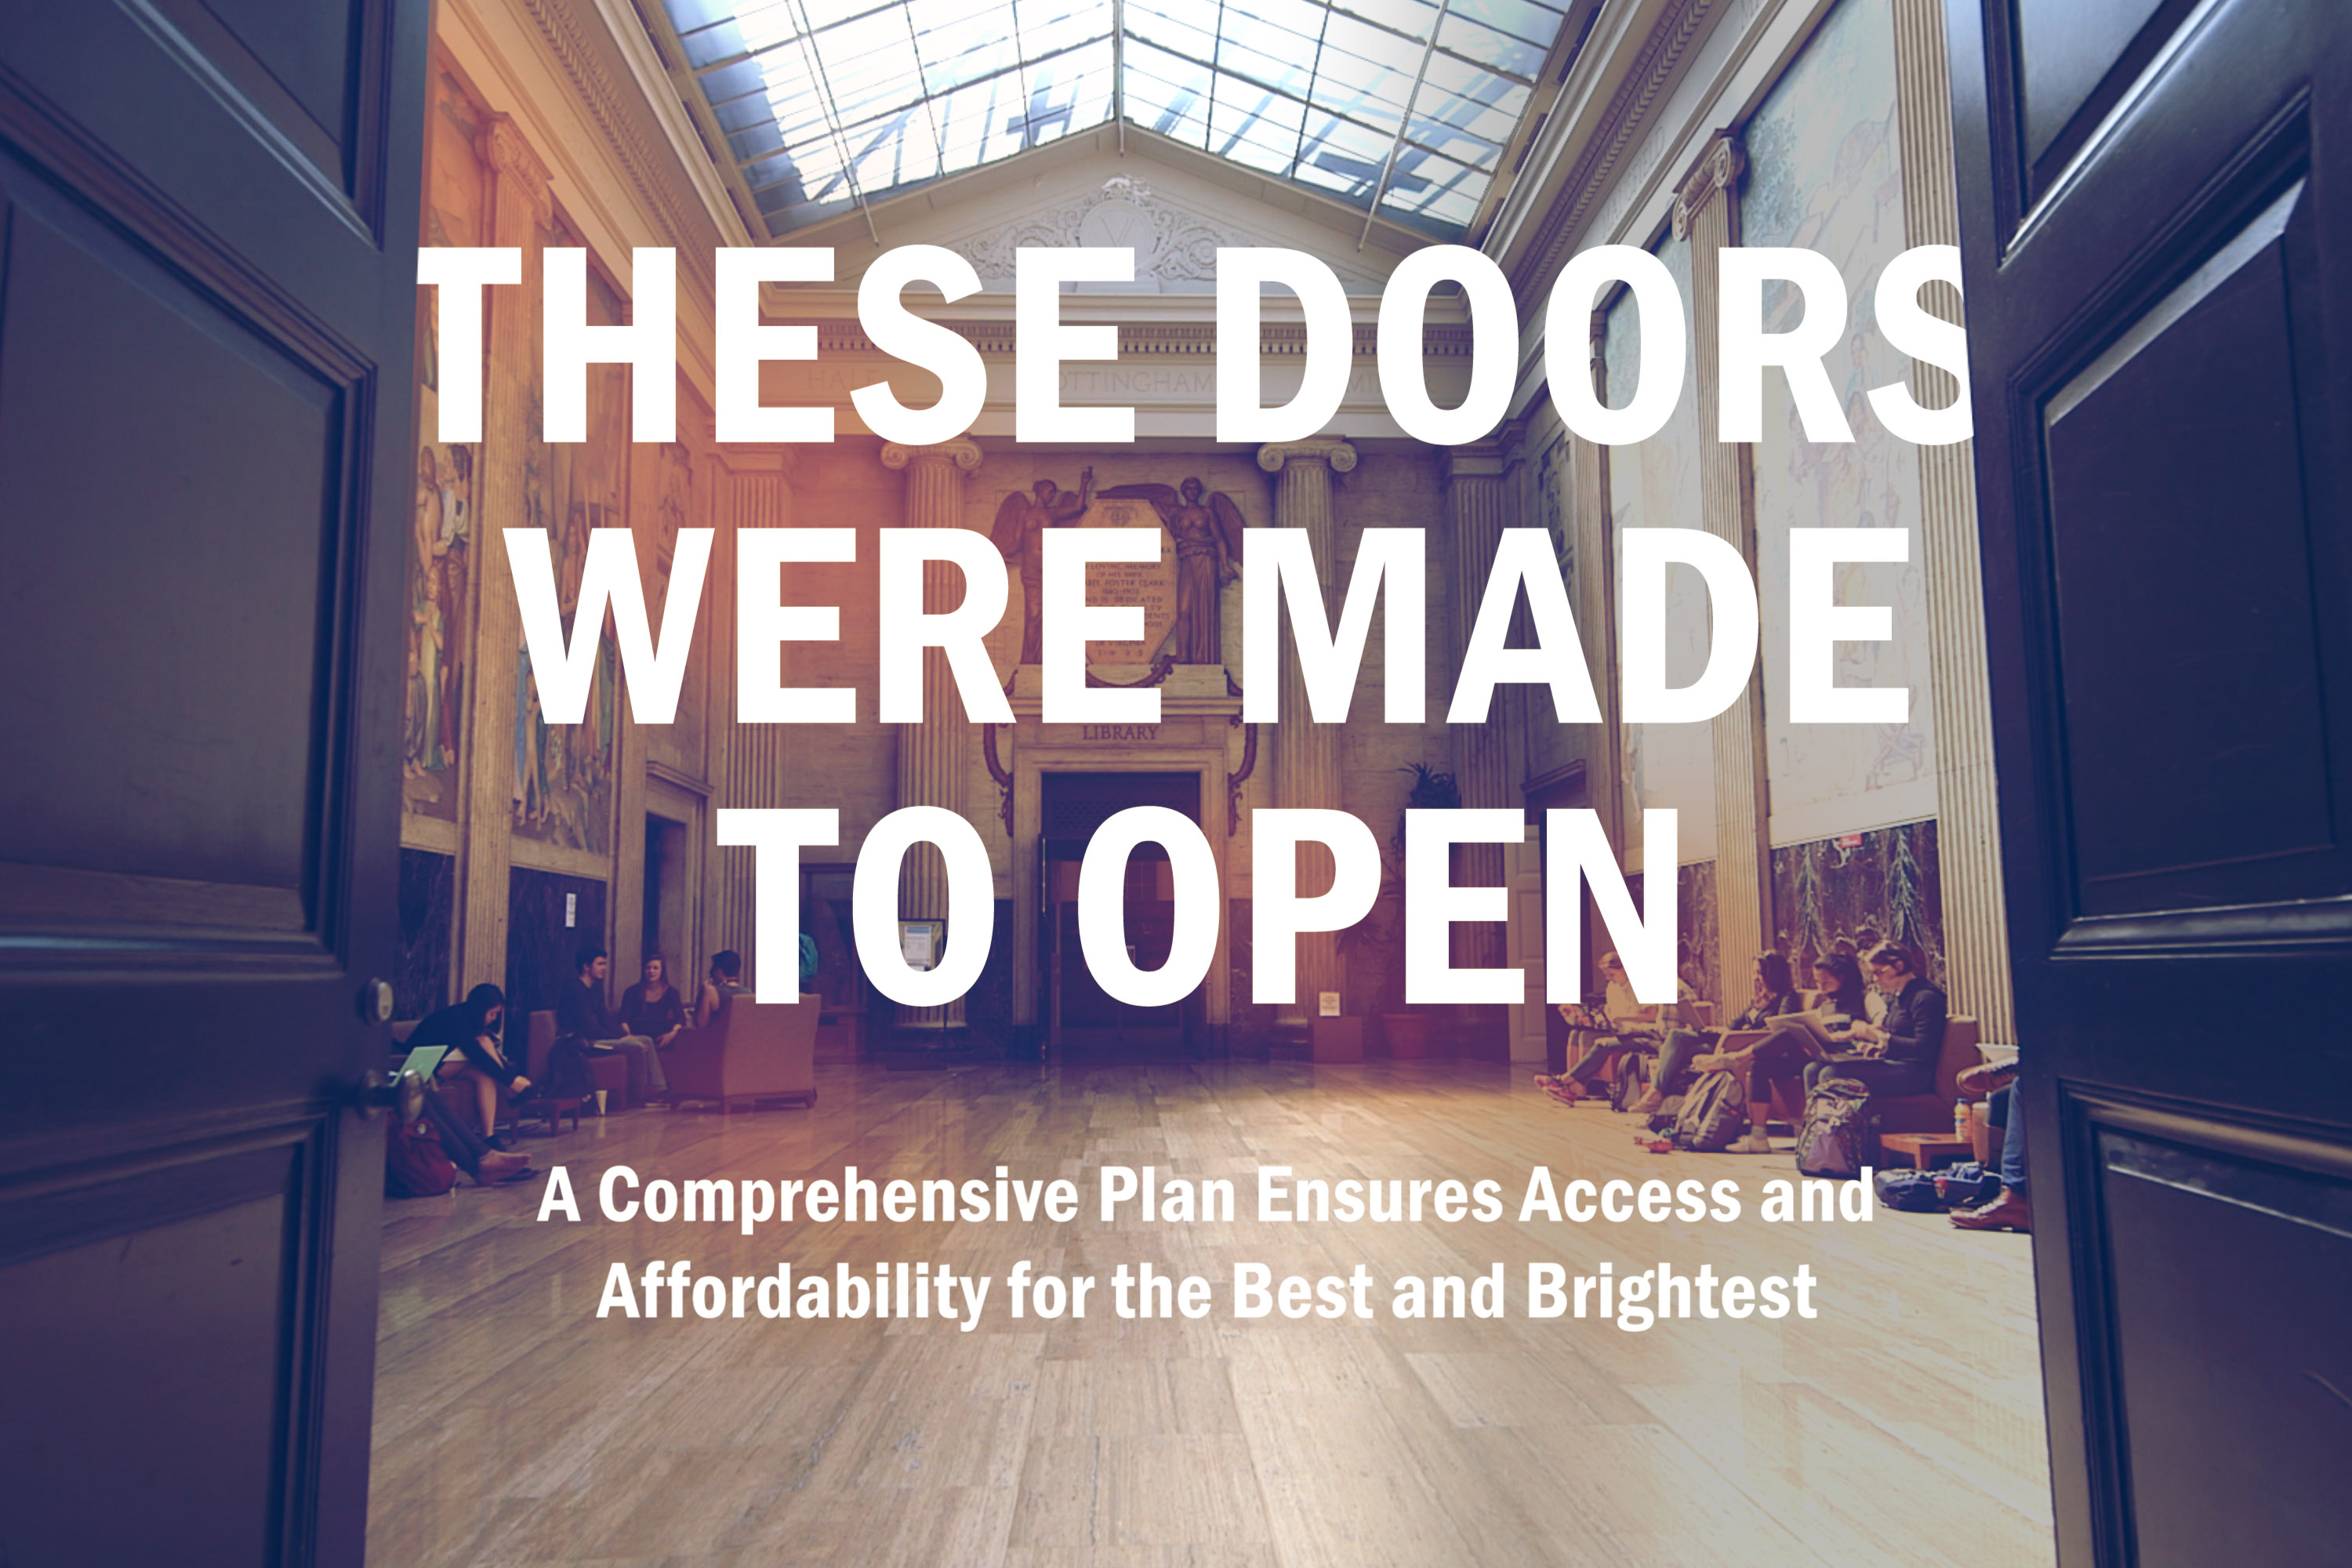 These Doors Were Made to Open: A Comprehensive Plan Ensures Access and Affordability for the Best and Brightest